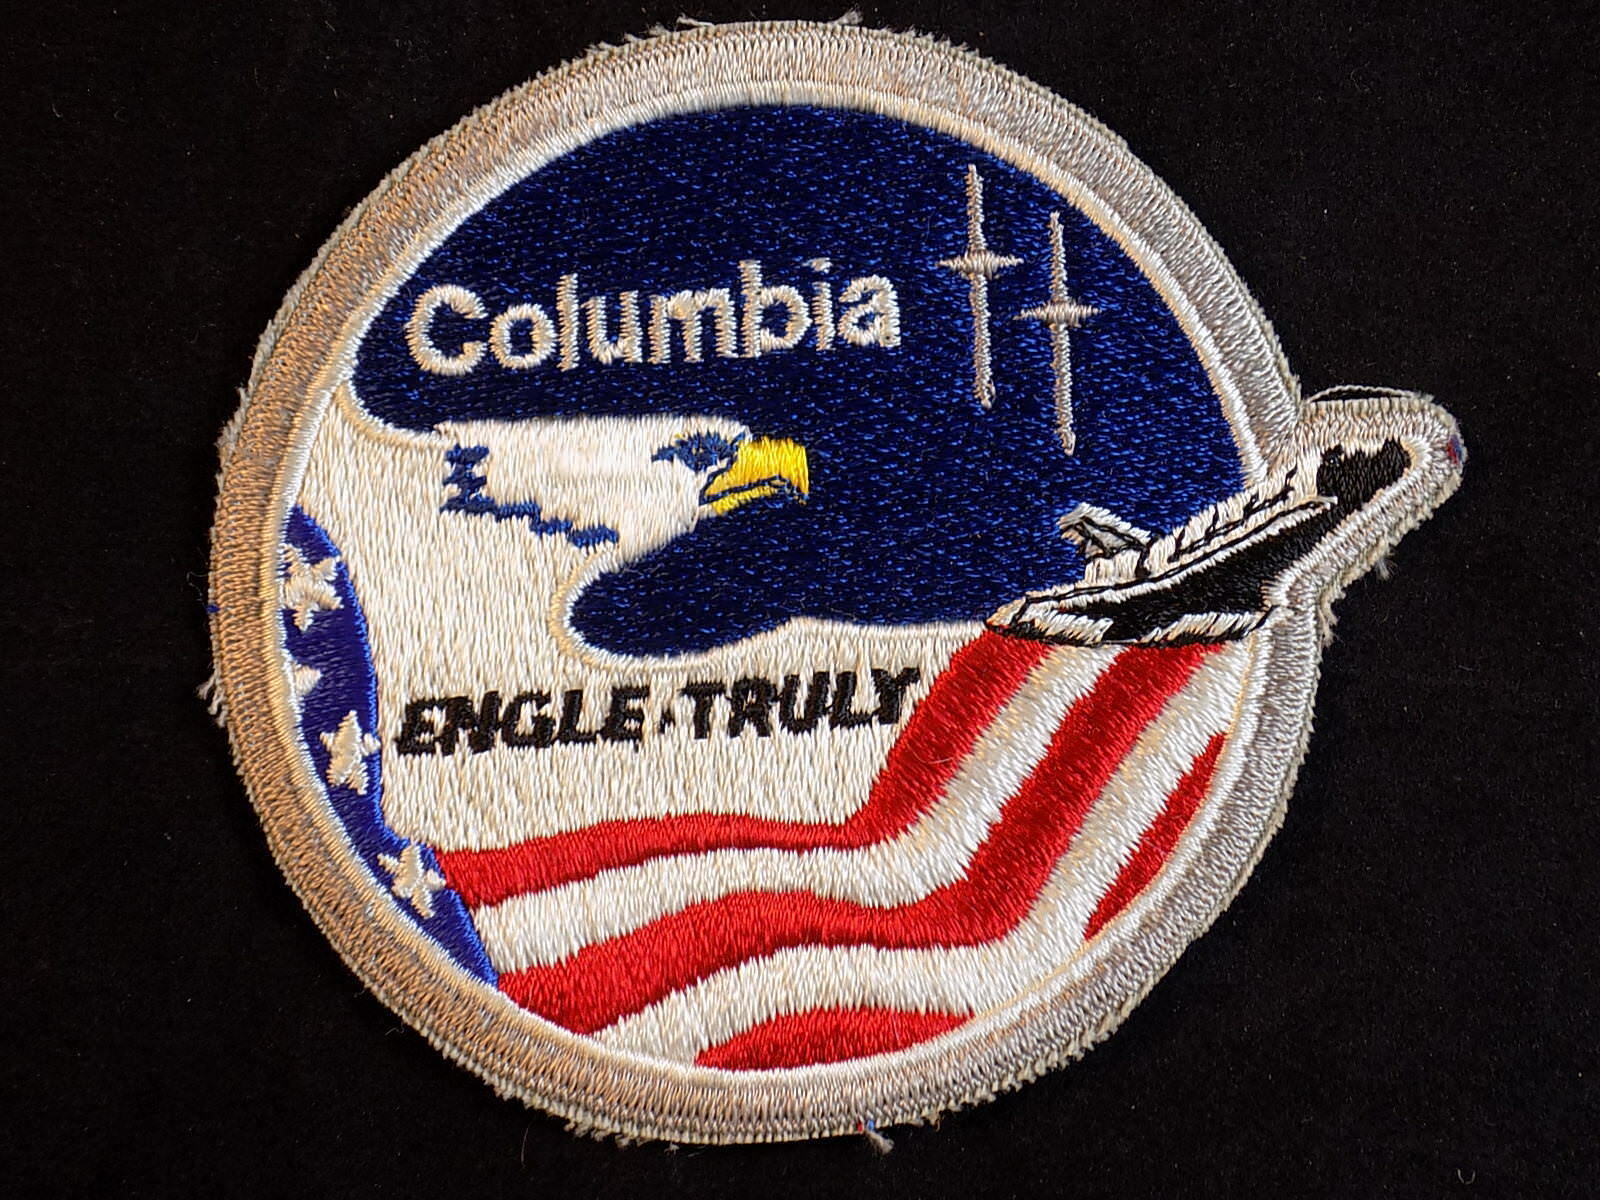 Primary image for "NASA Space Shuttle Columbia STS-2 1981 Engle Truly USA Rocket Eagle Jacket Patc